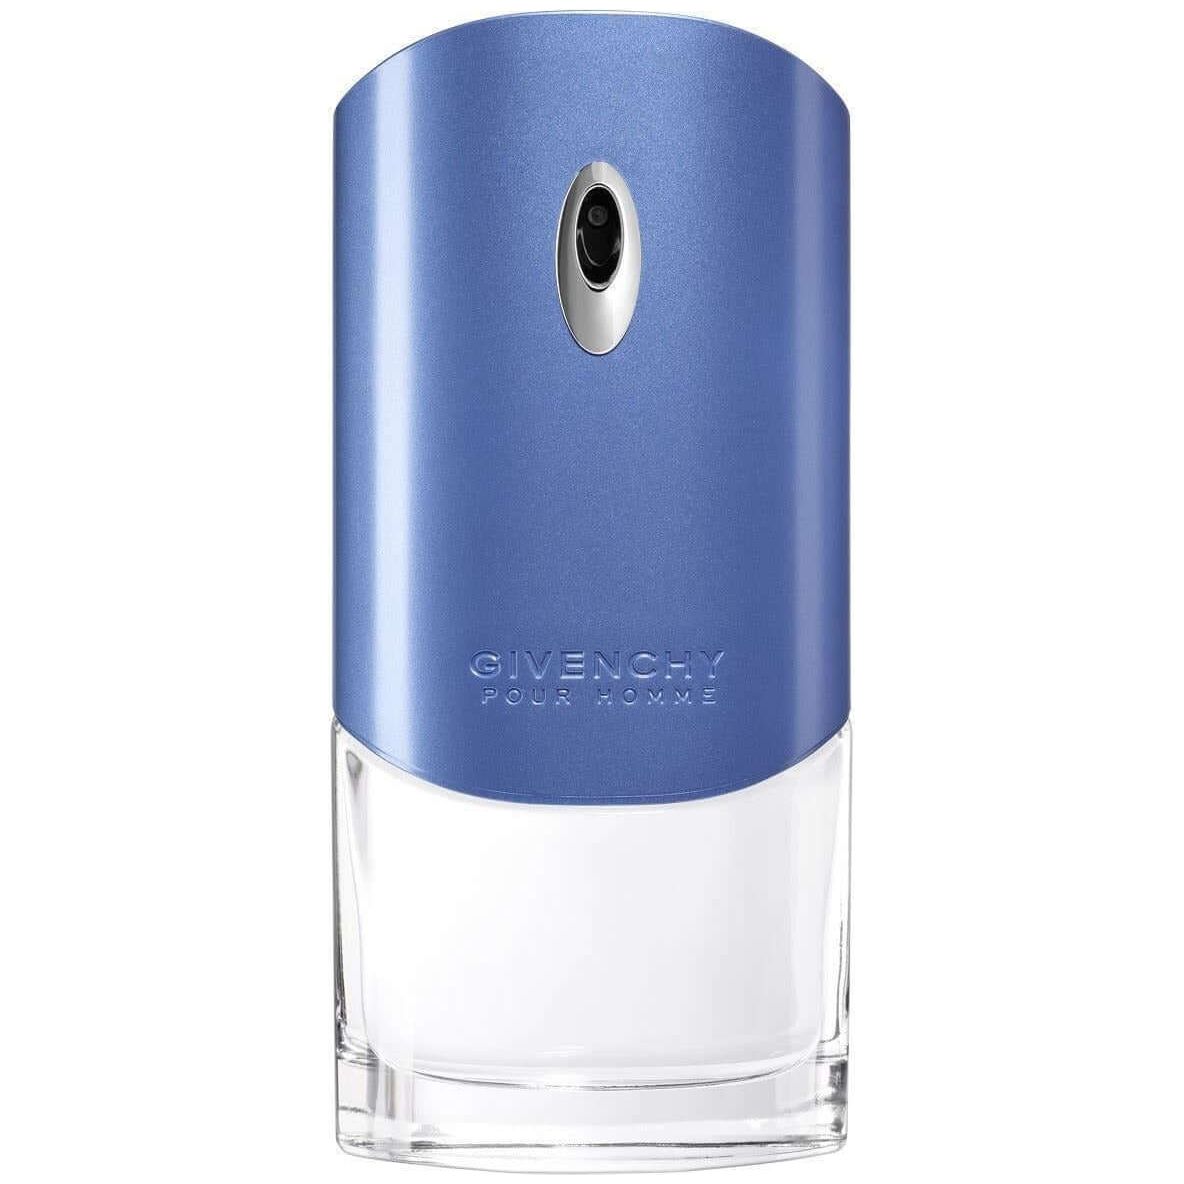 Givenchy Pour Homme EDT for him 100mL Tester - Givenchy